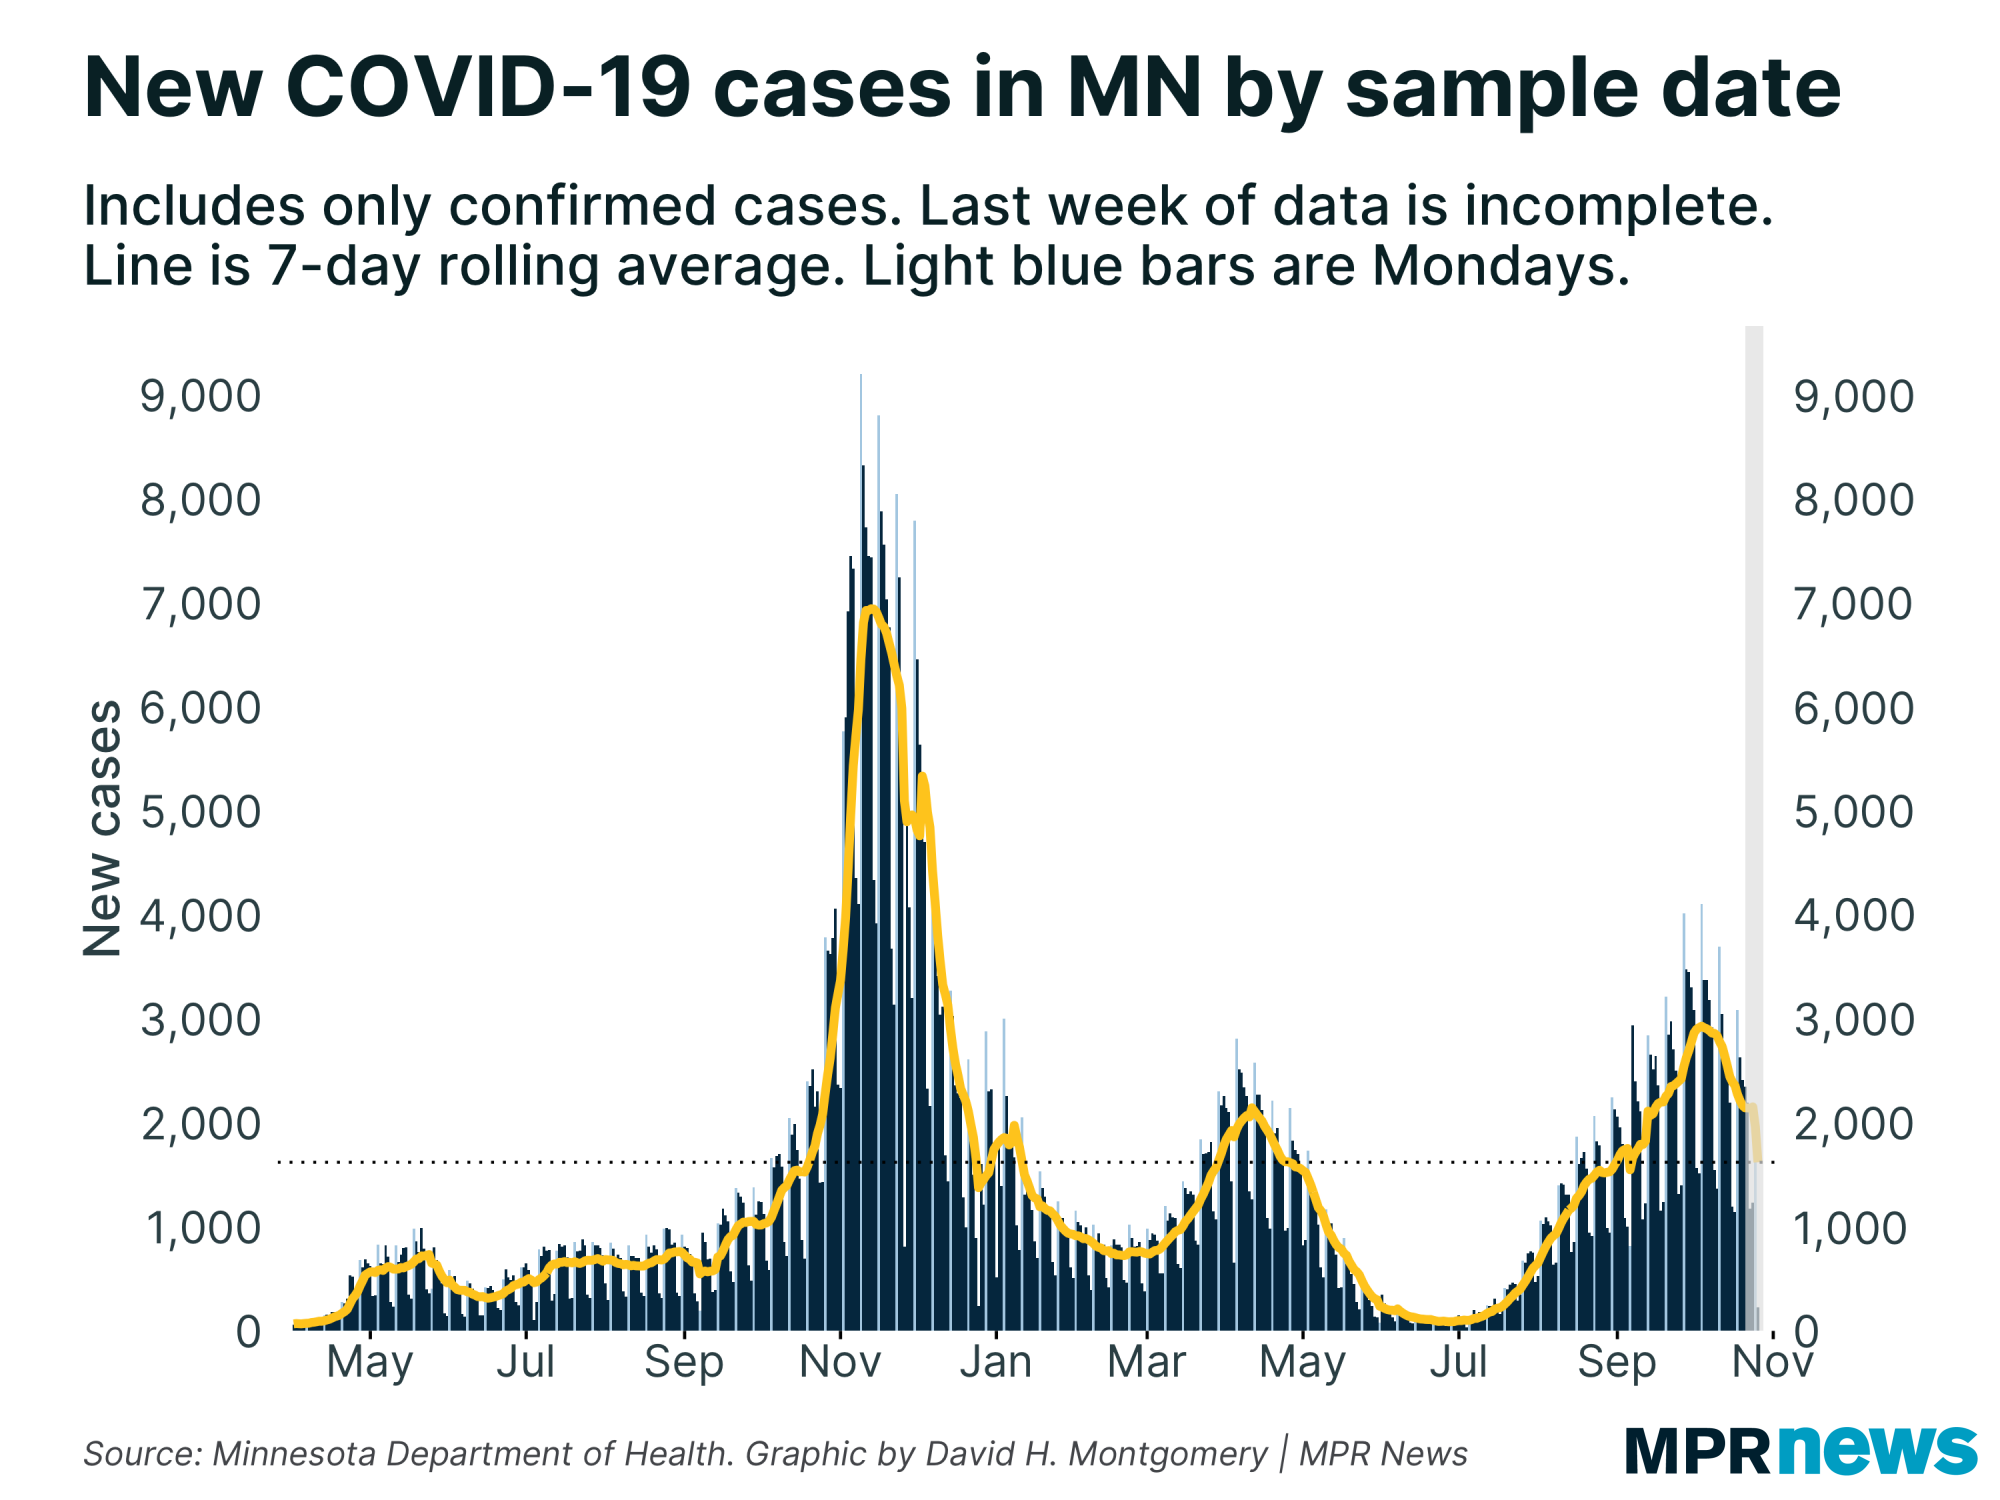 New COVID-19 cases by sample date